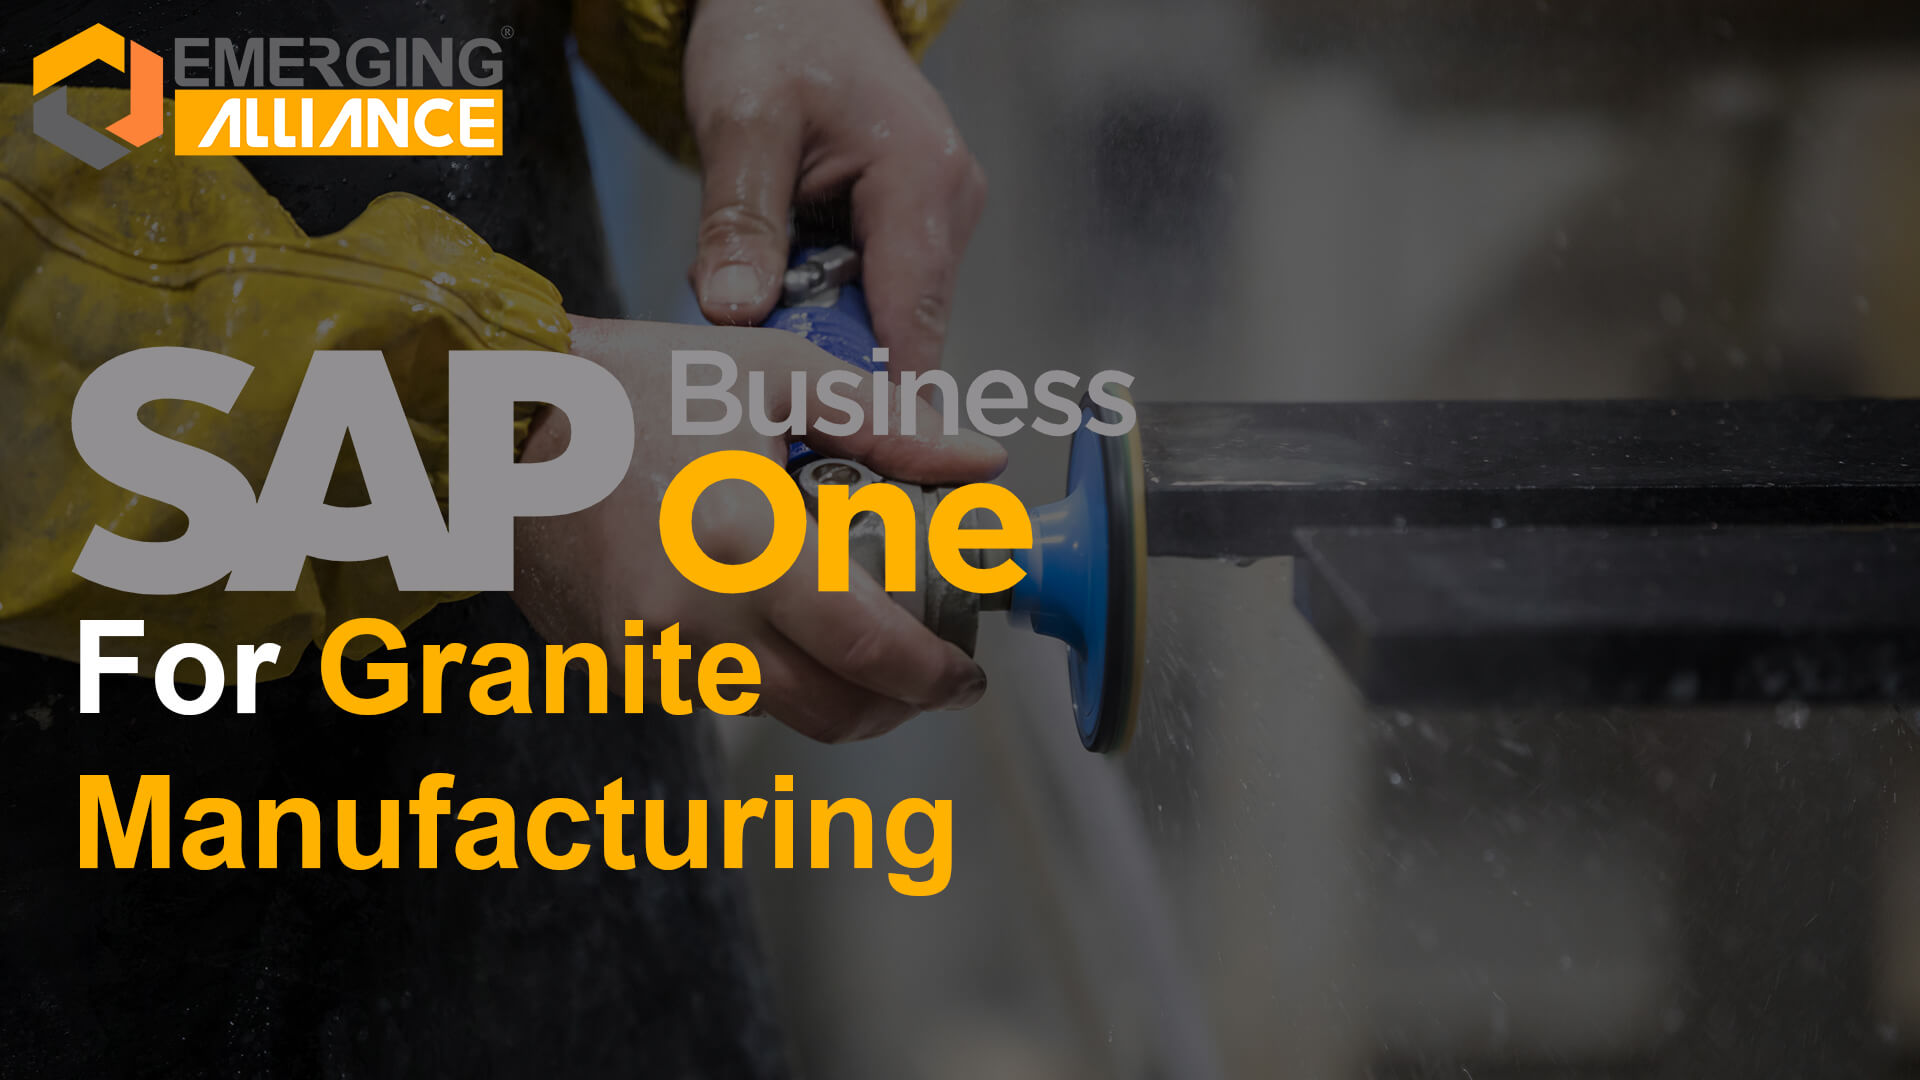 sap business one for granite manufacturing